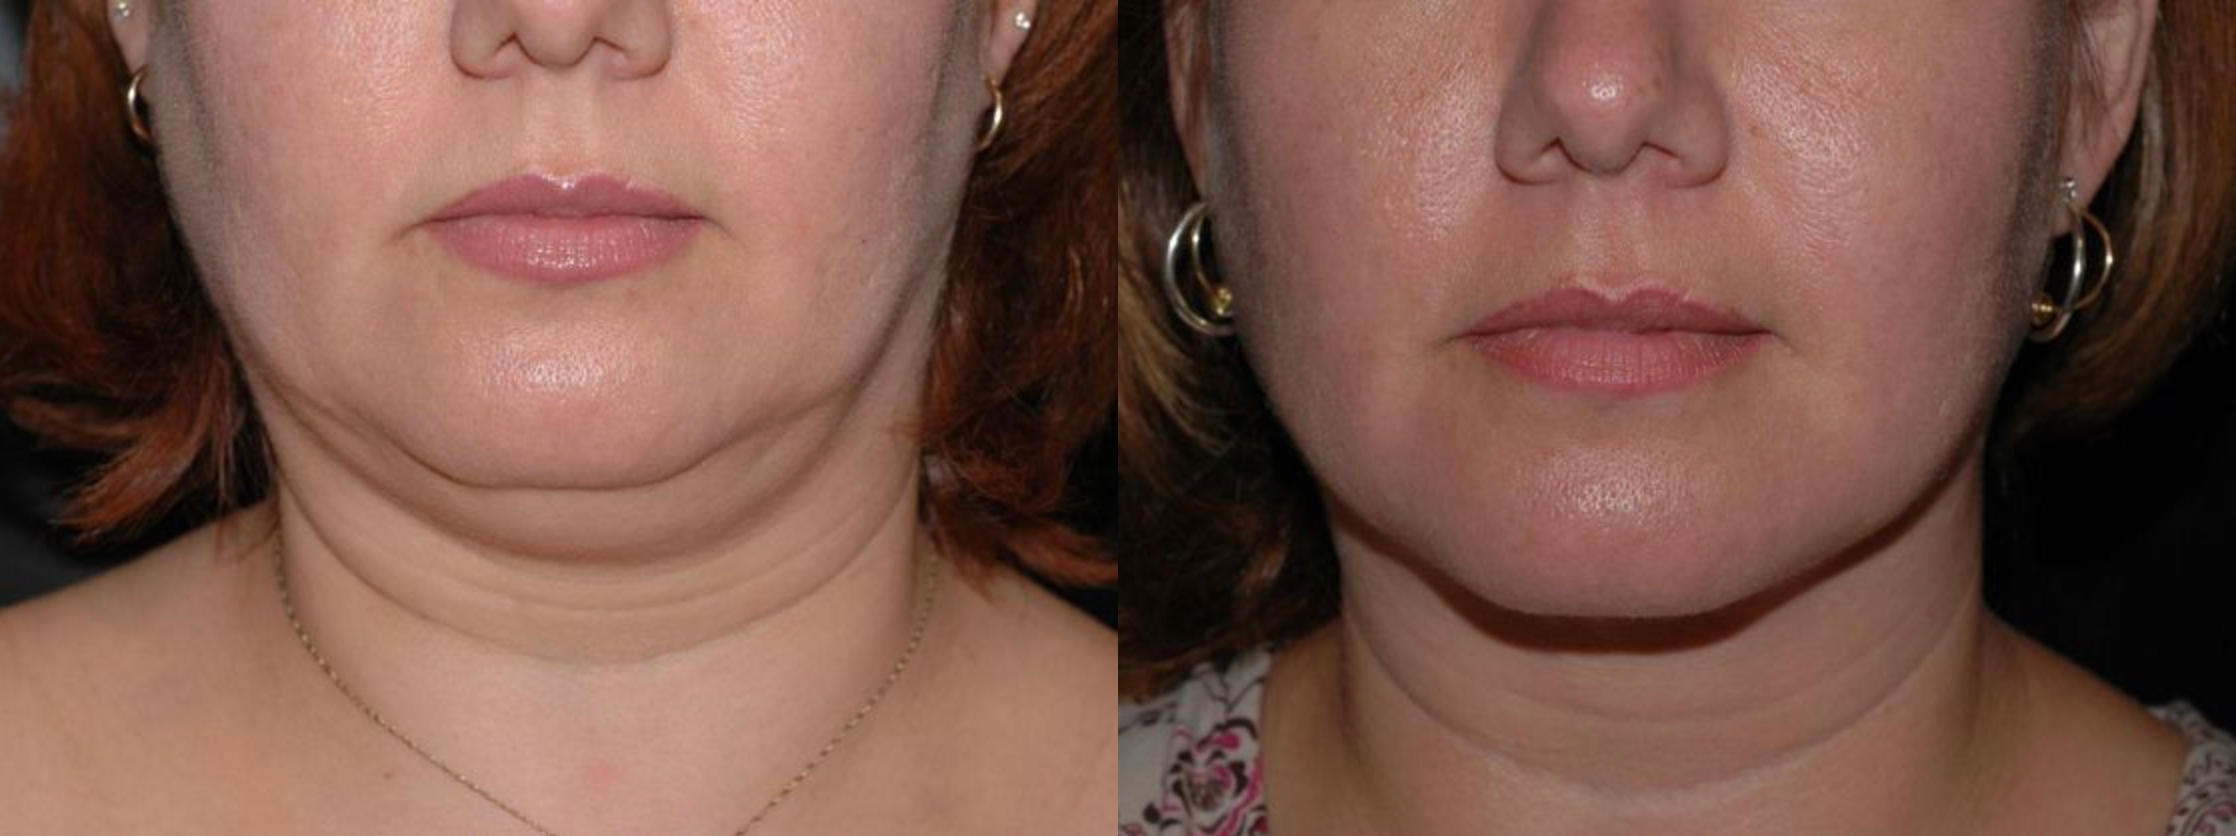 Before & After at Carmel Cosmetic and Plastic Surgeons | Carmel, IN